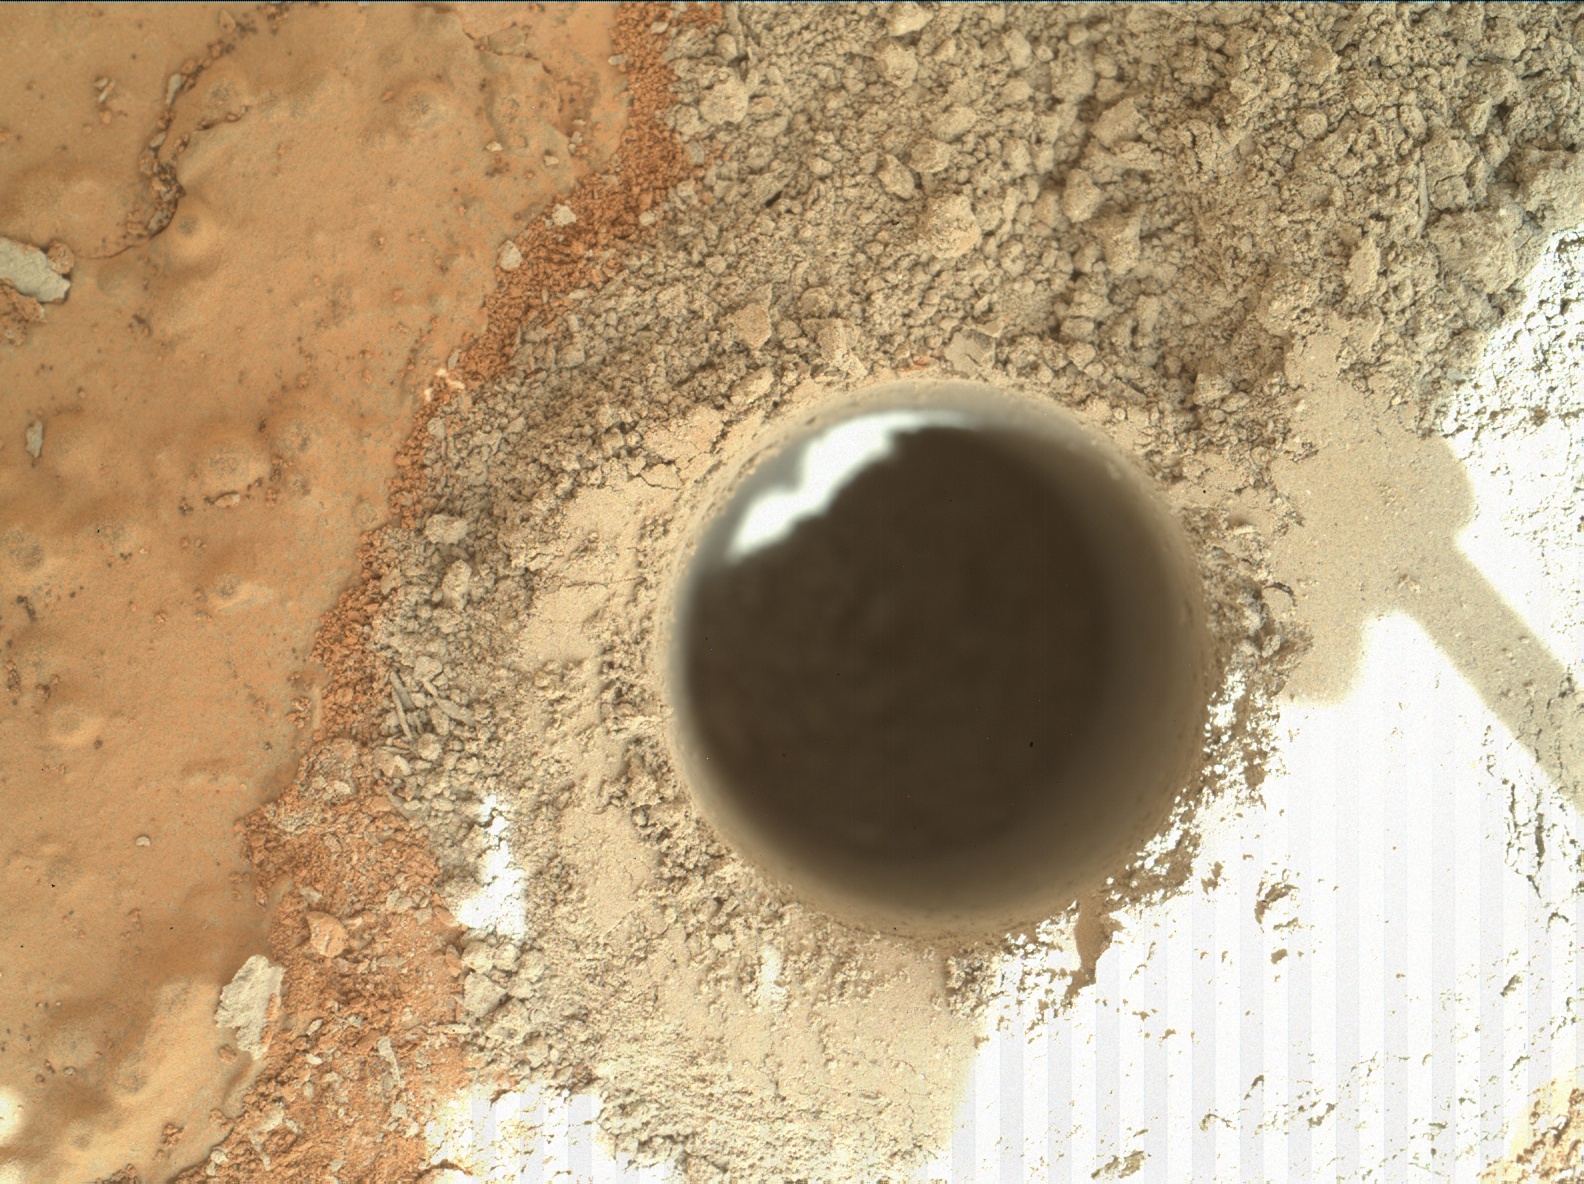 Nasa's Mars rover Curiosity acquired this image using its Mars Hand Lens Imager (MAHLI) on Sol 279